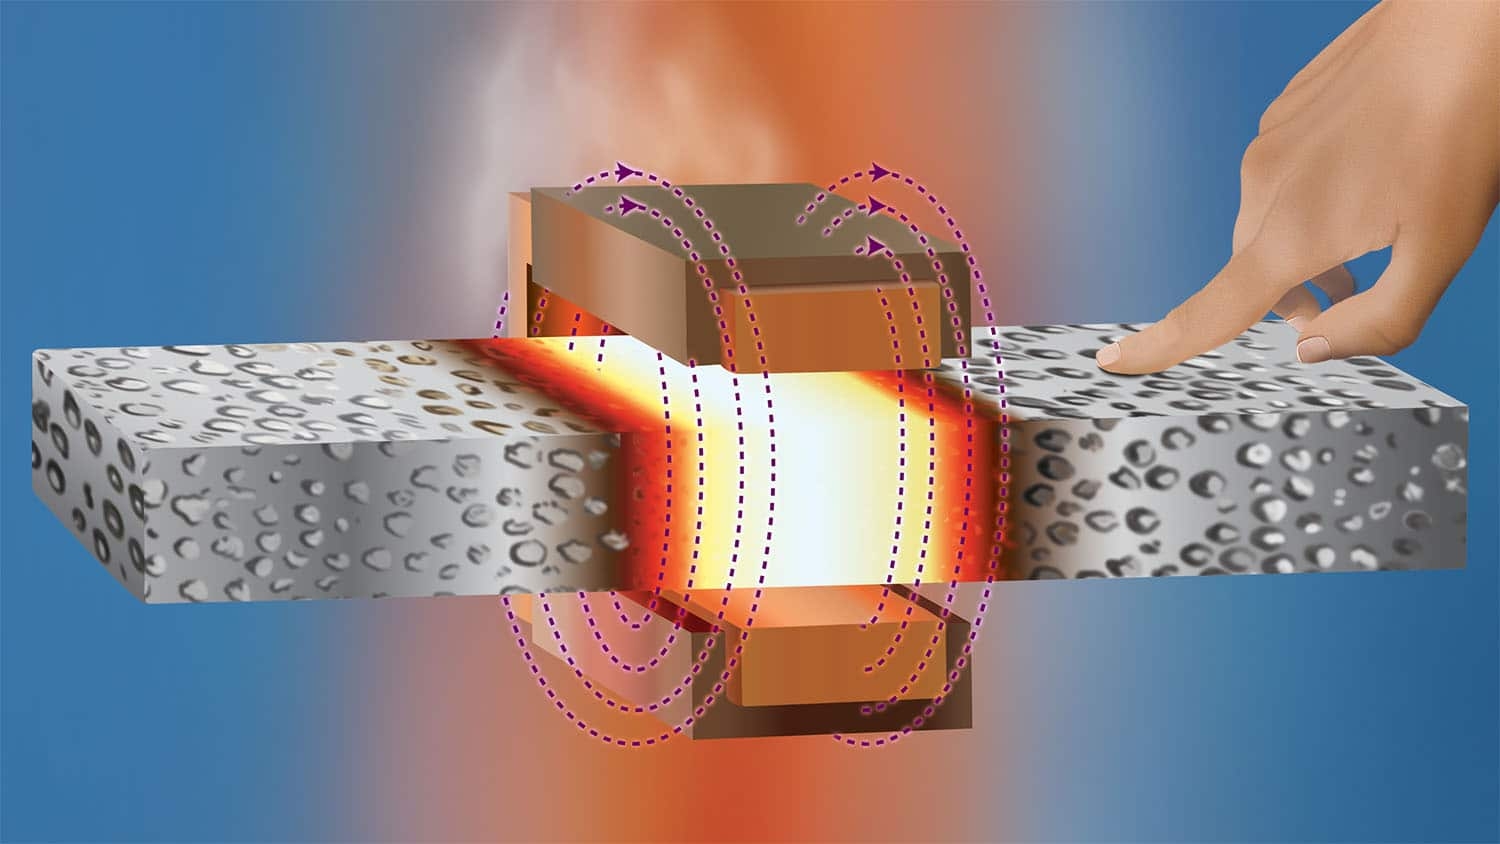 illustration shows two pieces of metal foam being welded together using an induction welder. Several inches away from the site of the weld (which is white hot), the metal foam is cool enough to touch with a bare hand.